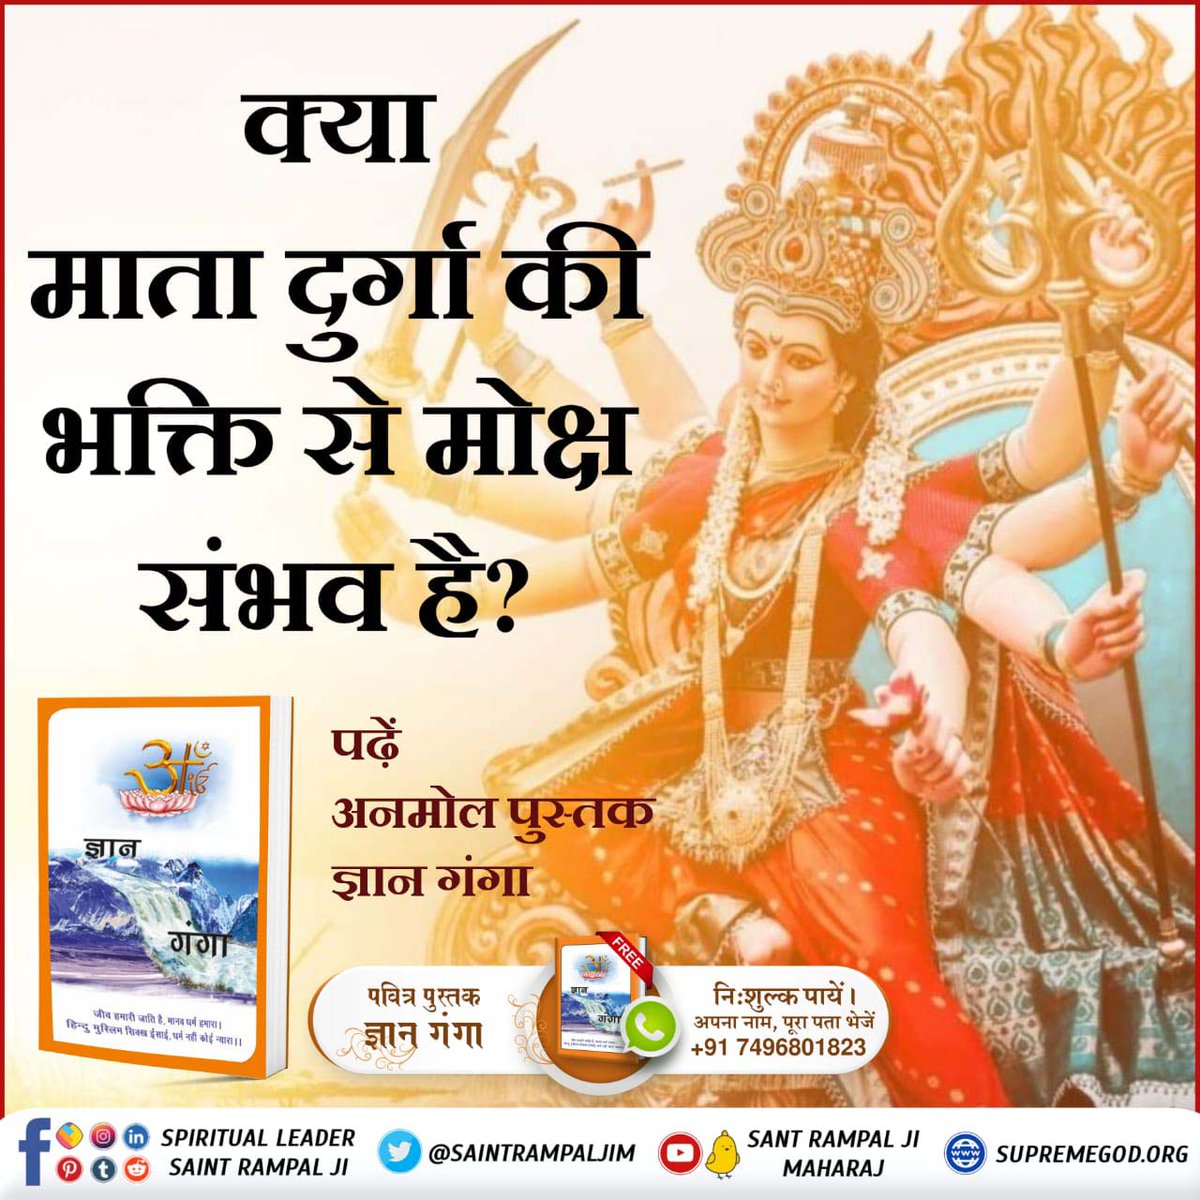 #माँ_को_खुश_करनेकेलिए पढ़ें ज्ञान गंगा
Can Goddess  Durga  cure the incurable  diseases  of  her devotee and also increase  his /her life❓️